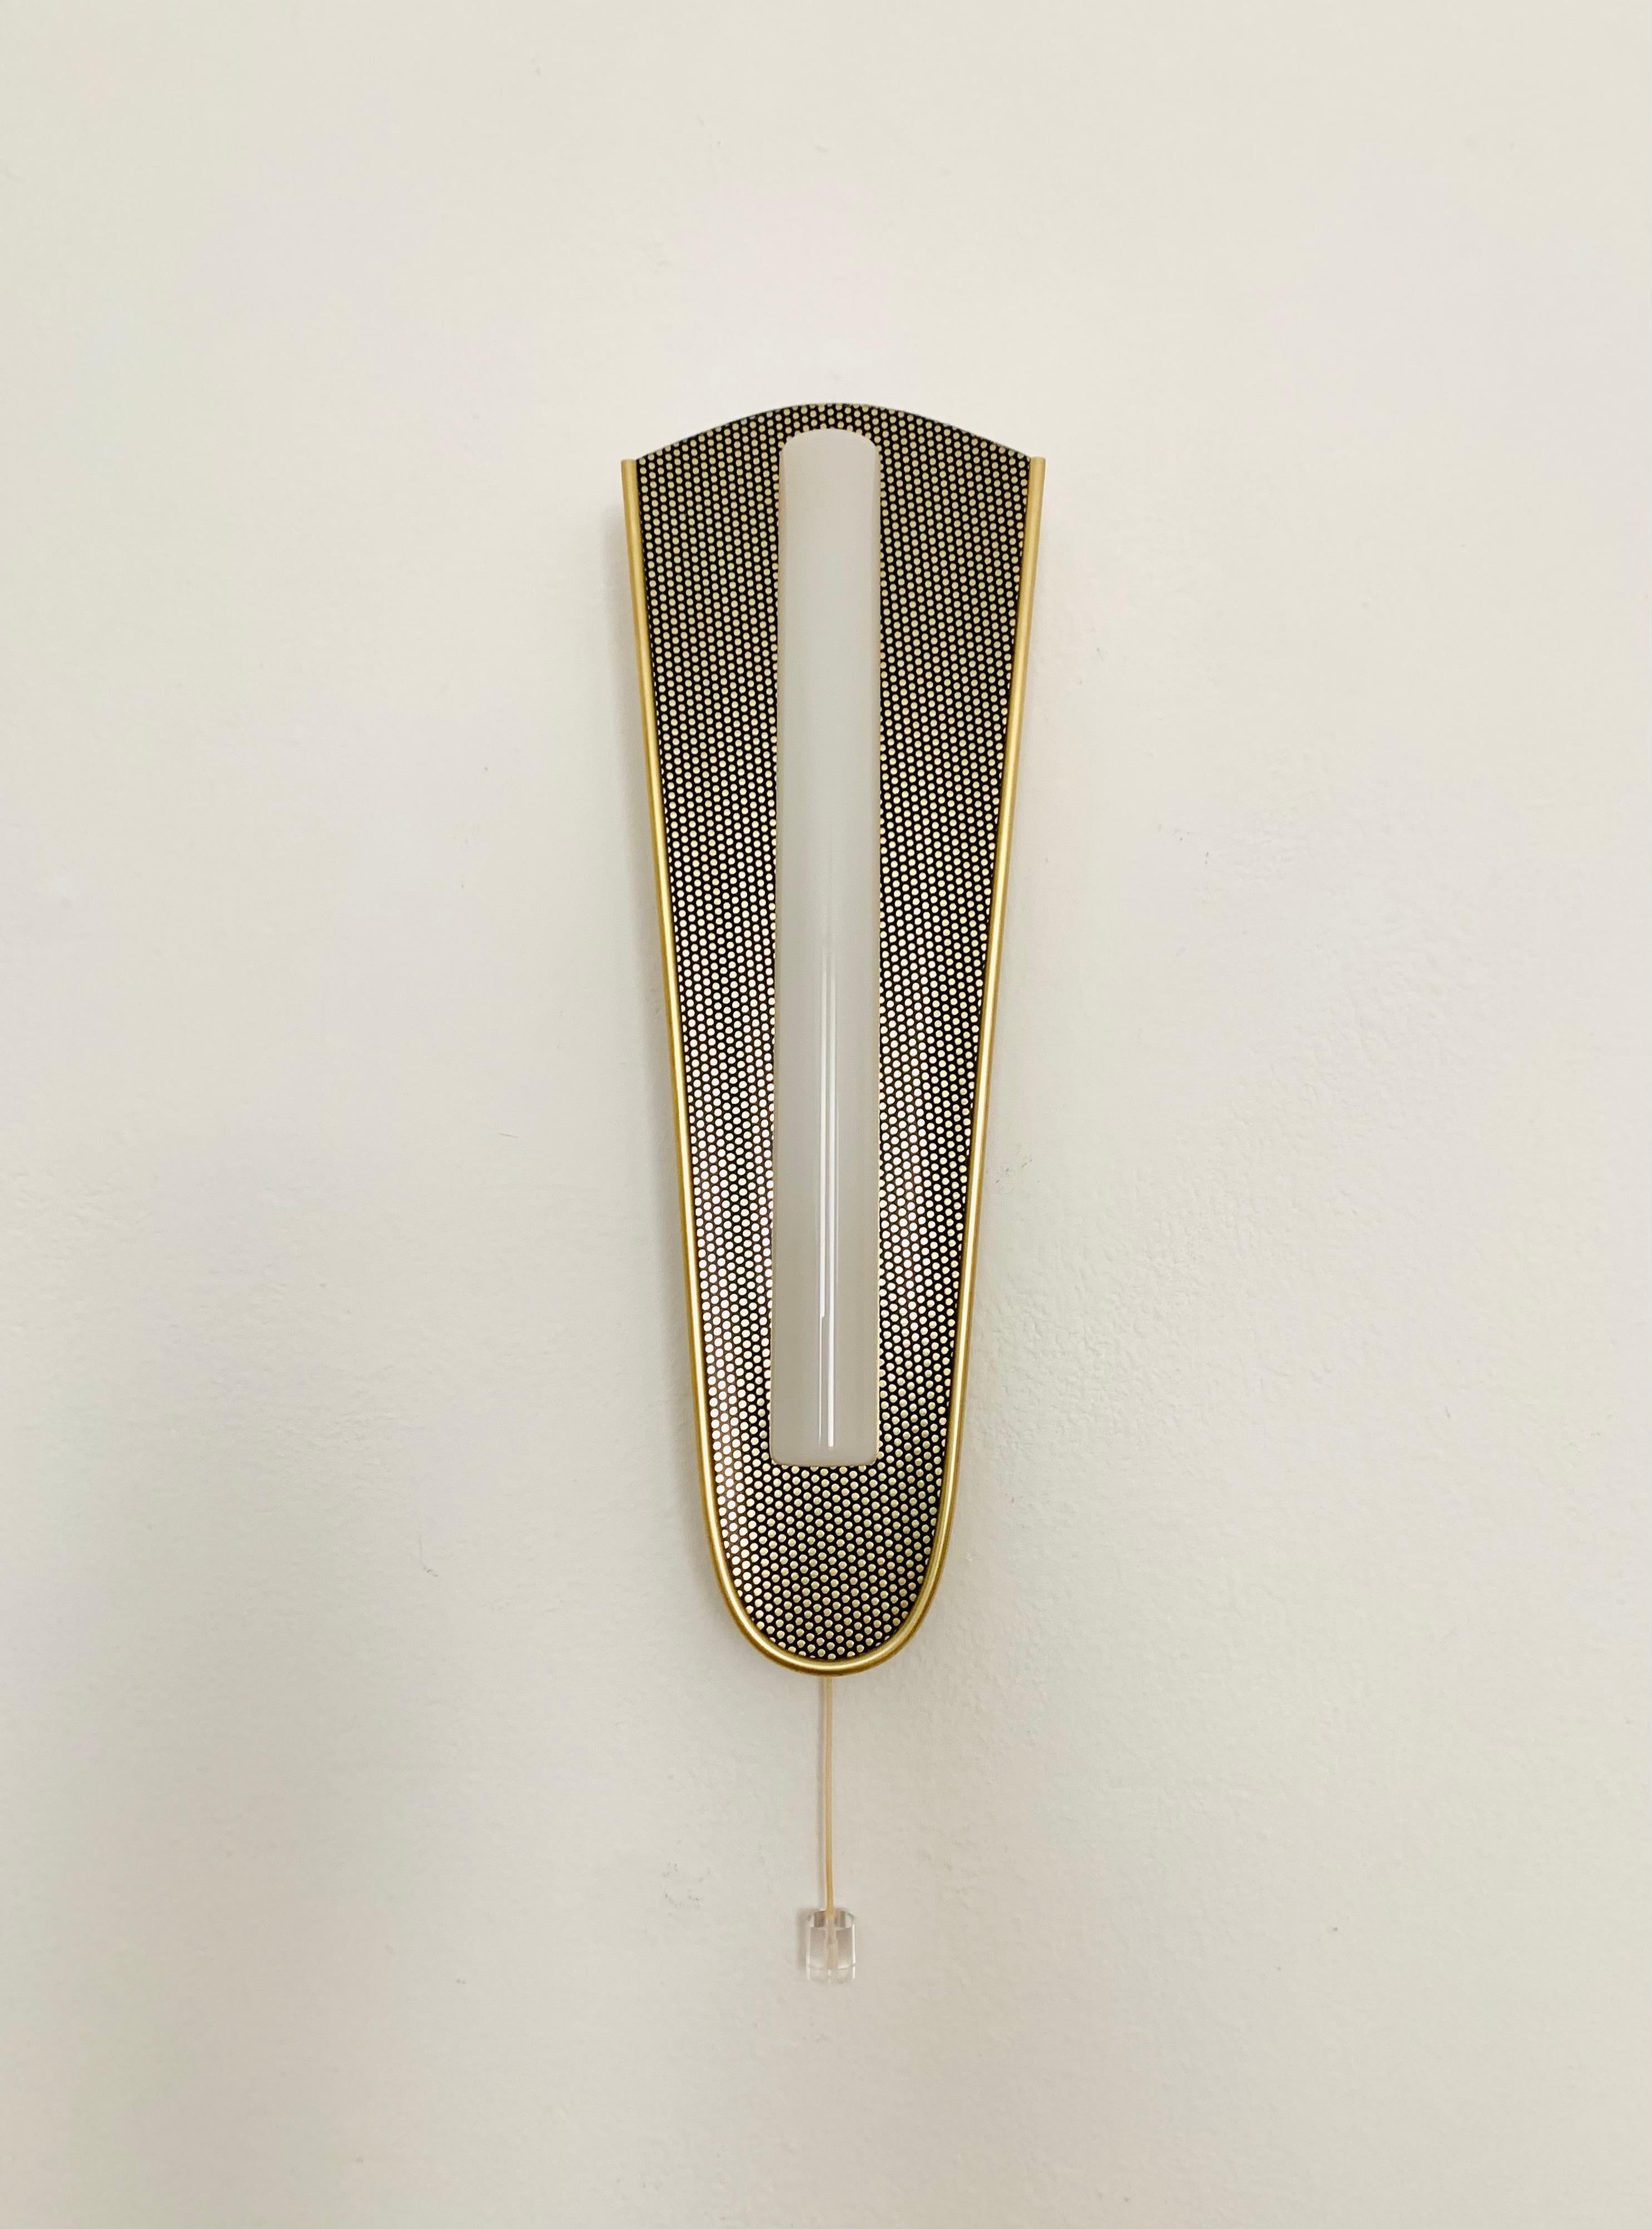 Particularly beautiful wall lamp from Erco from the 1960s.
Wonderful and contemporary design.
The lamp is manufactured to a very high quality and is a highlight for every home.

Manufacturer: Erco

Condition:

Very good vintage condition with slight